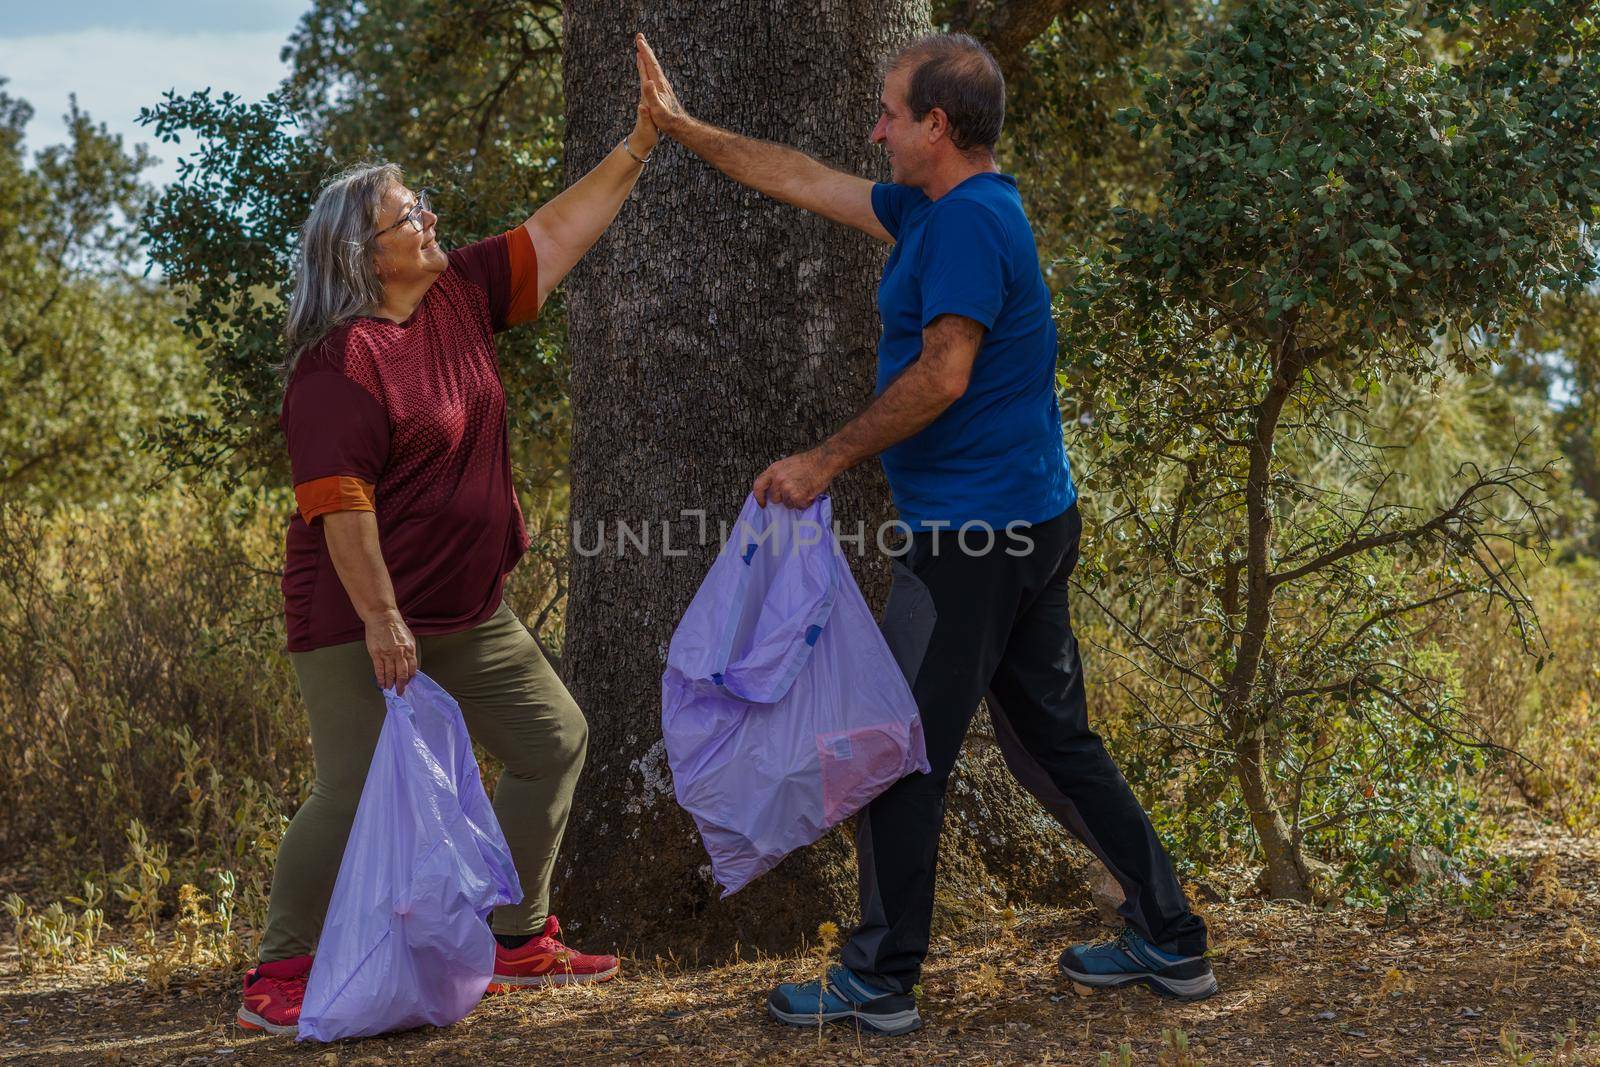 environmentalist couple high-fiving in the bush cleanup with garbage bags in their hands.